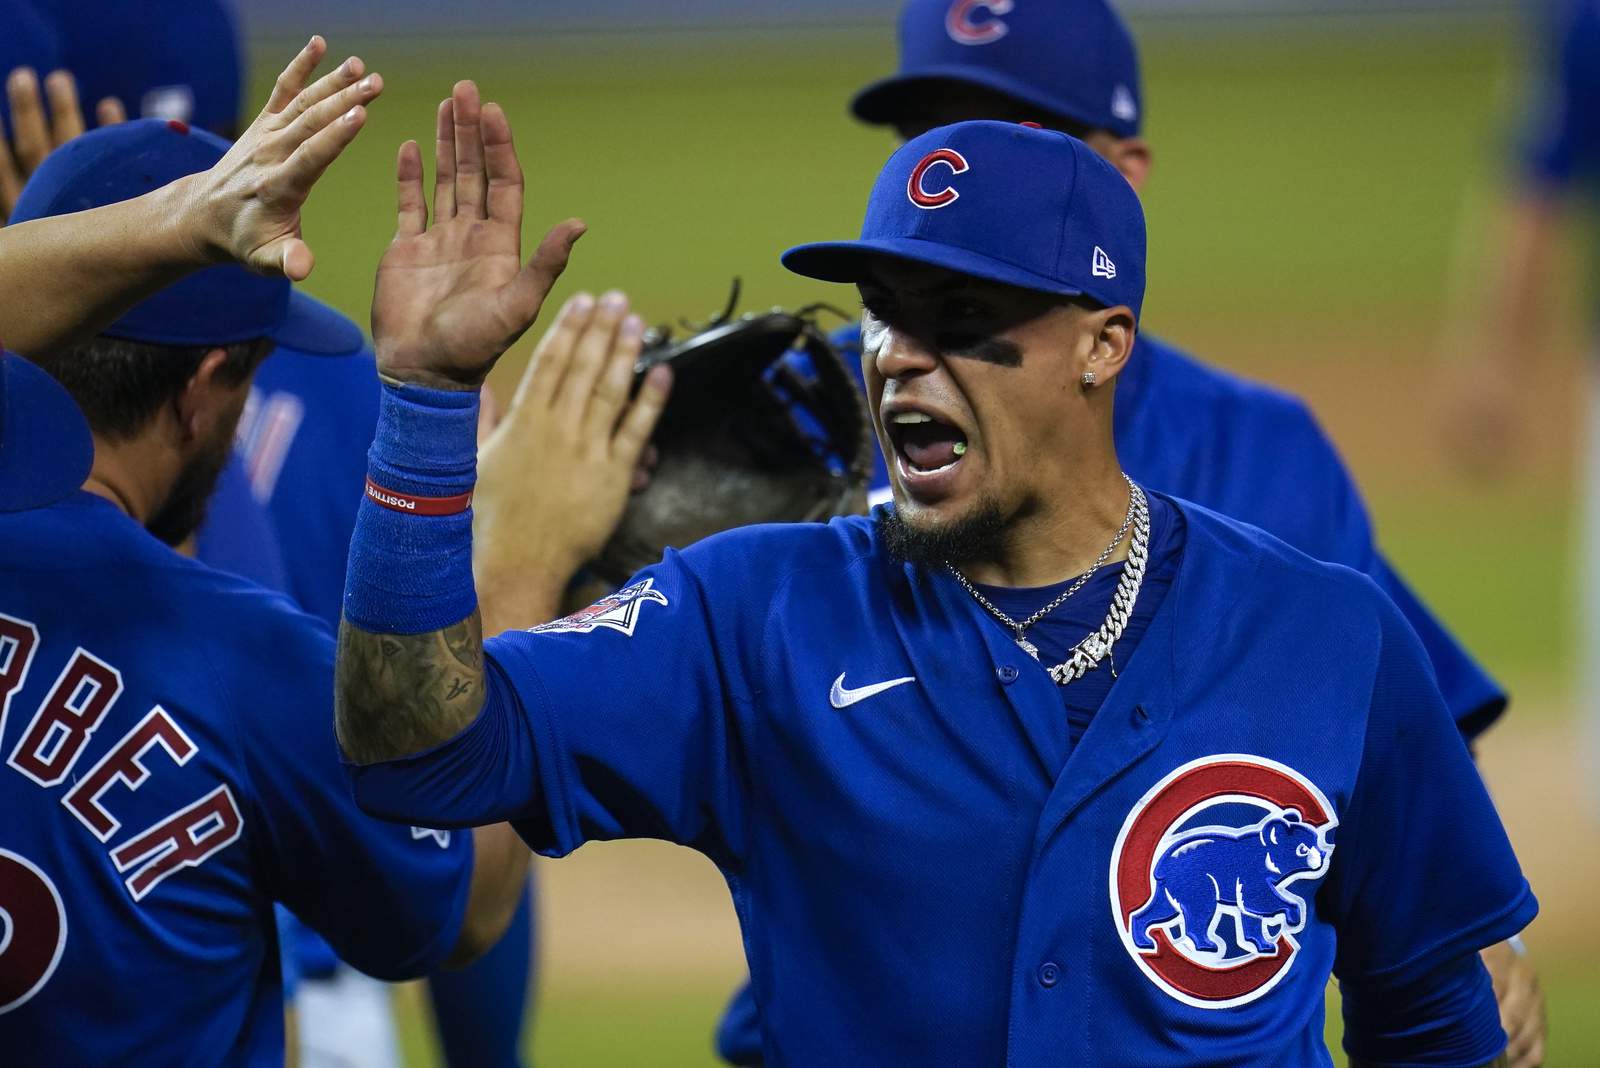 Bez hits 2 HRs, Cubs beat Tigers for 11,000th franchise win